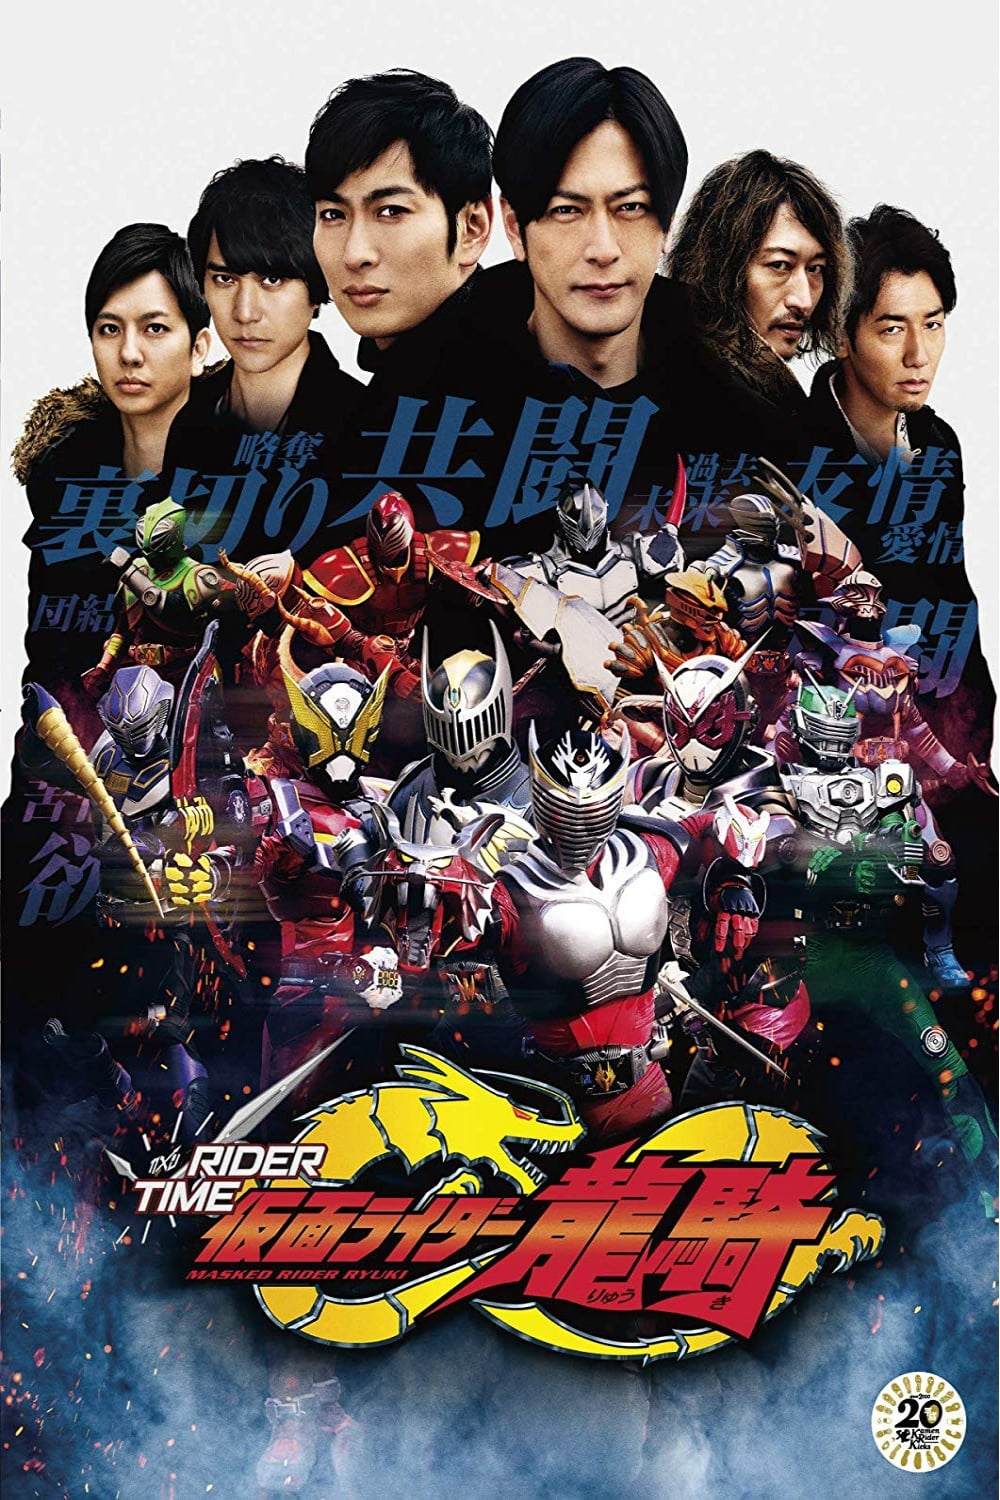 RIDER TIME 仮面ライダー龍騎 TV Shows About Amnesia